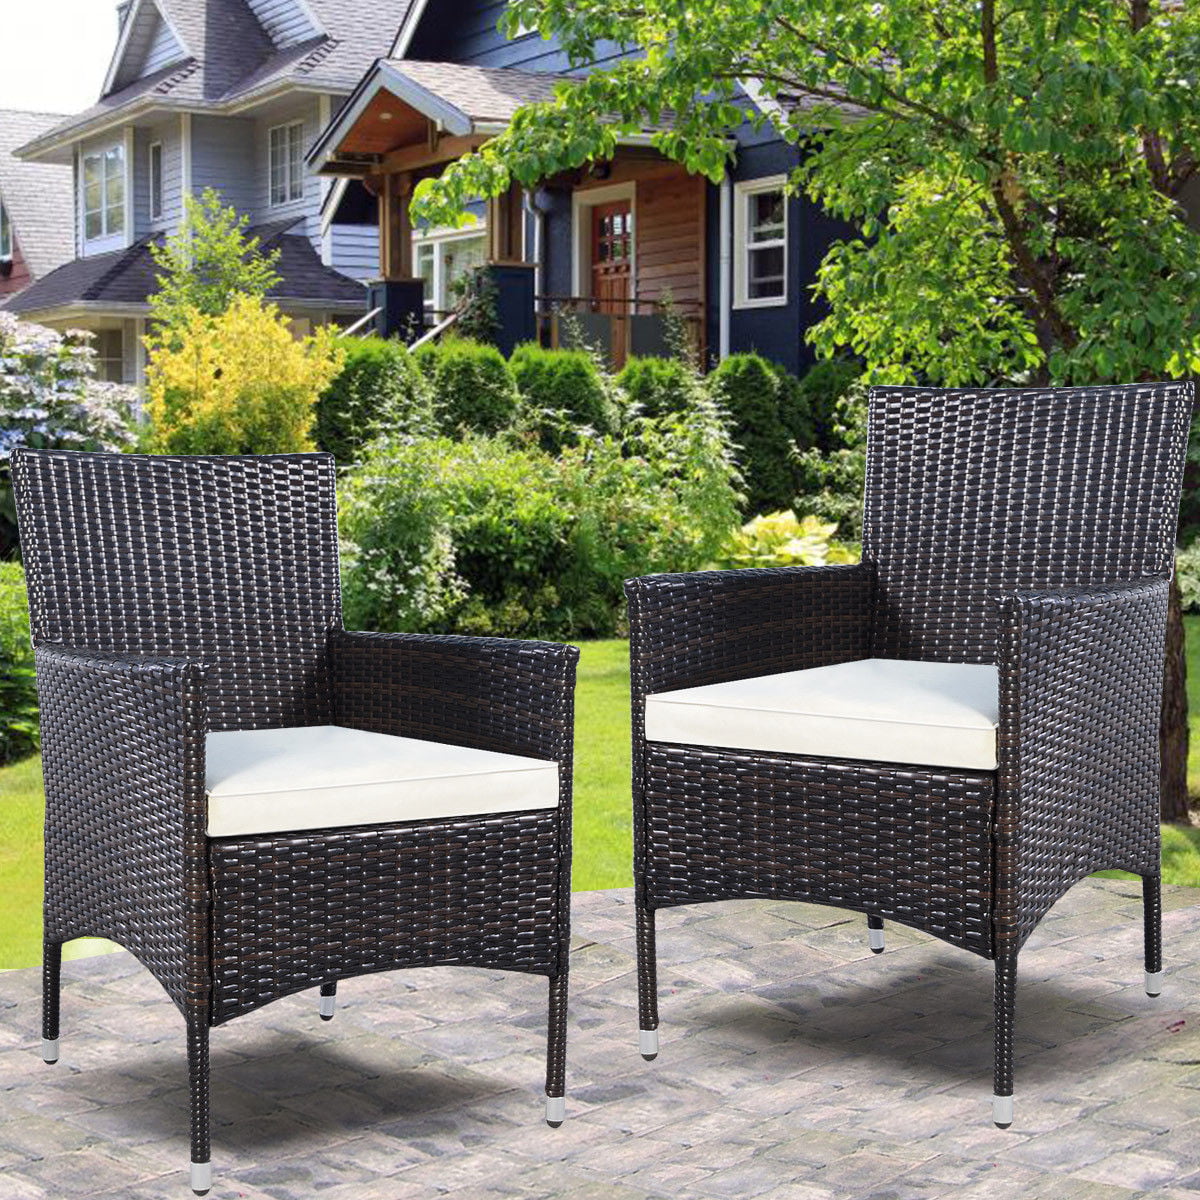 Costway Outdoor Rattan Wicker Dining Chairs With Cushions, Set of 2 ...